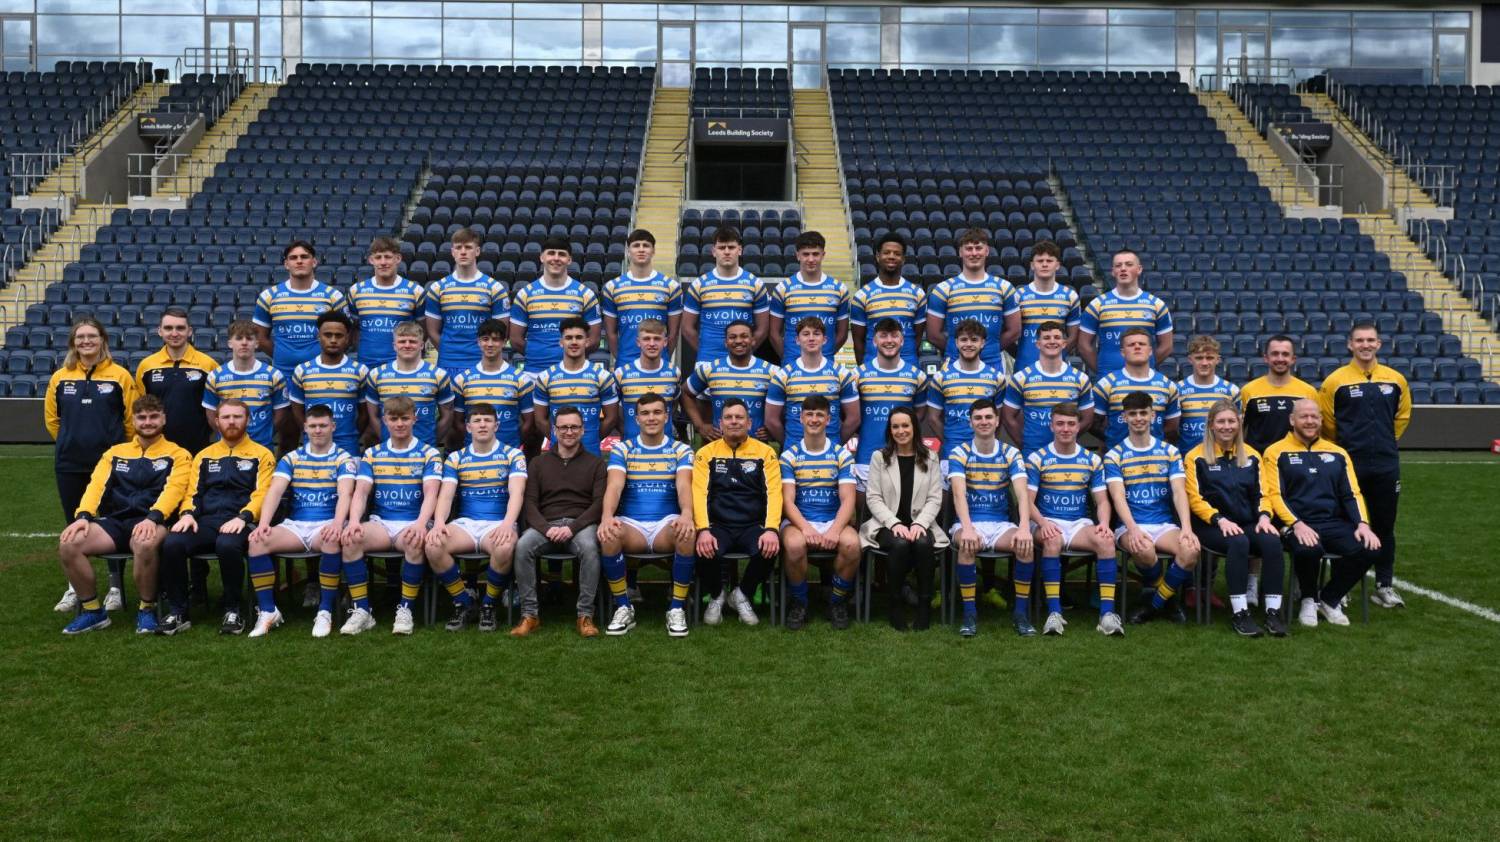 Evolve Lettings announced as new principal sponsor of the Rhinos Men’s Under 18s and Under 16s teams